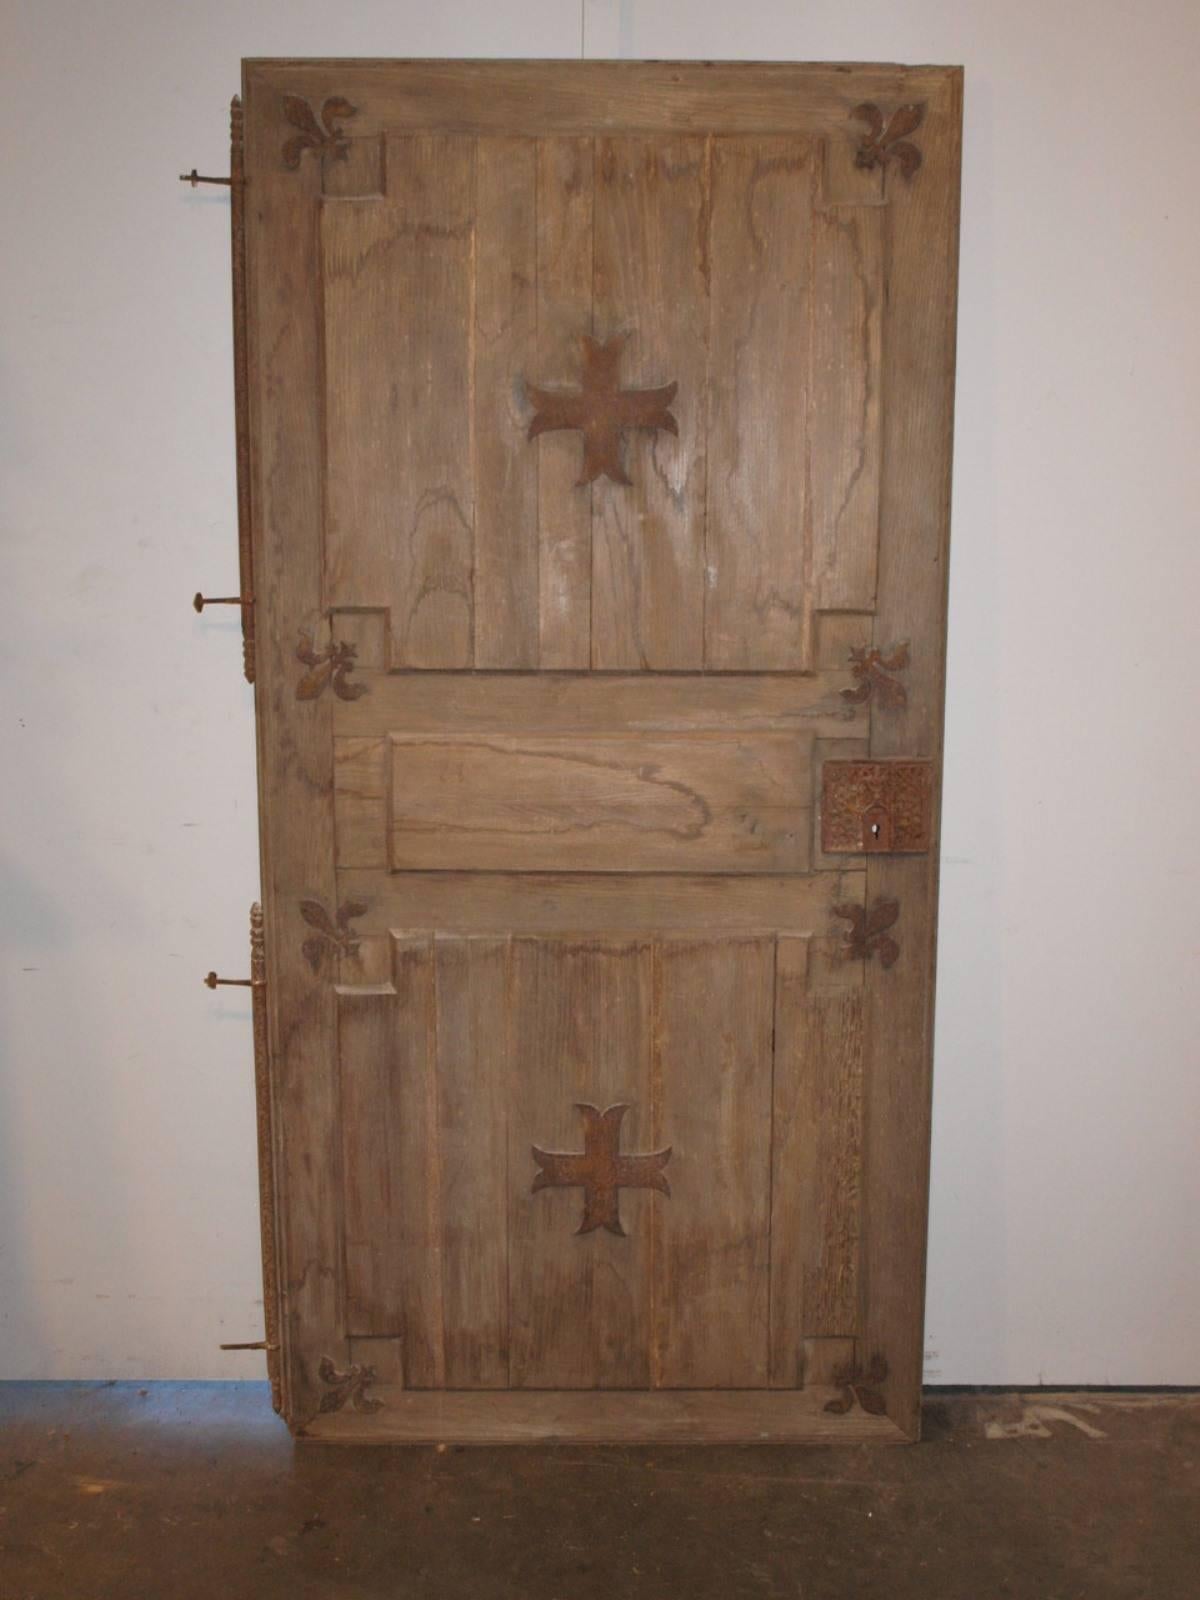 A charming pair of earlier 19th century armoire doors from the Sologne region in France.  Beautifully constructed from oak and adorned with iron Fleur De Lys and crosses.  The lock cover of one door has a fantastic iron plaque.  The pair of doors